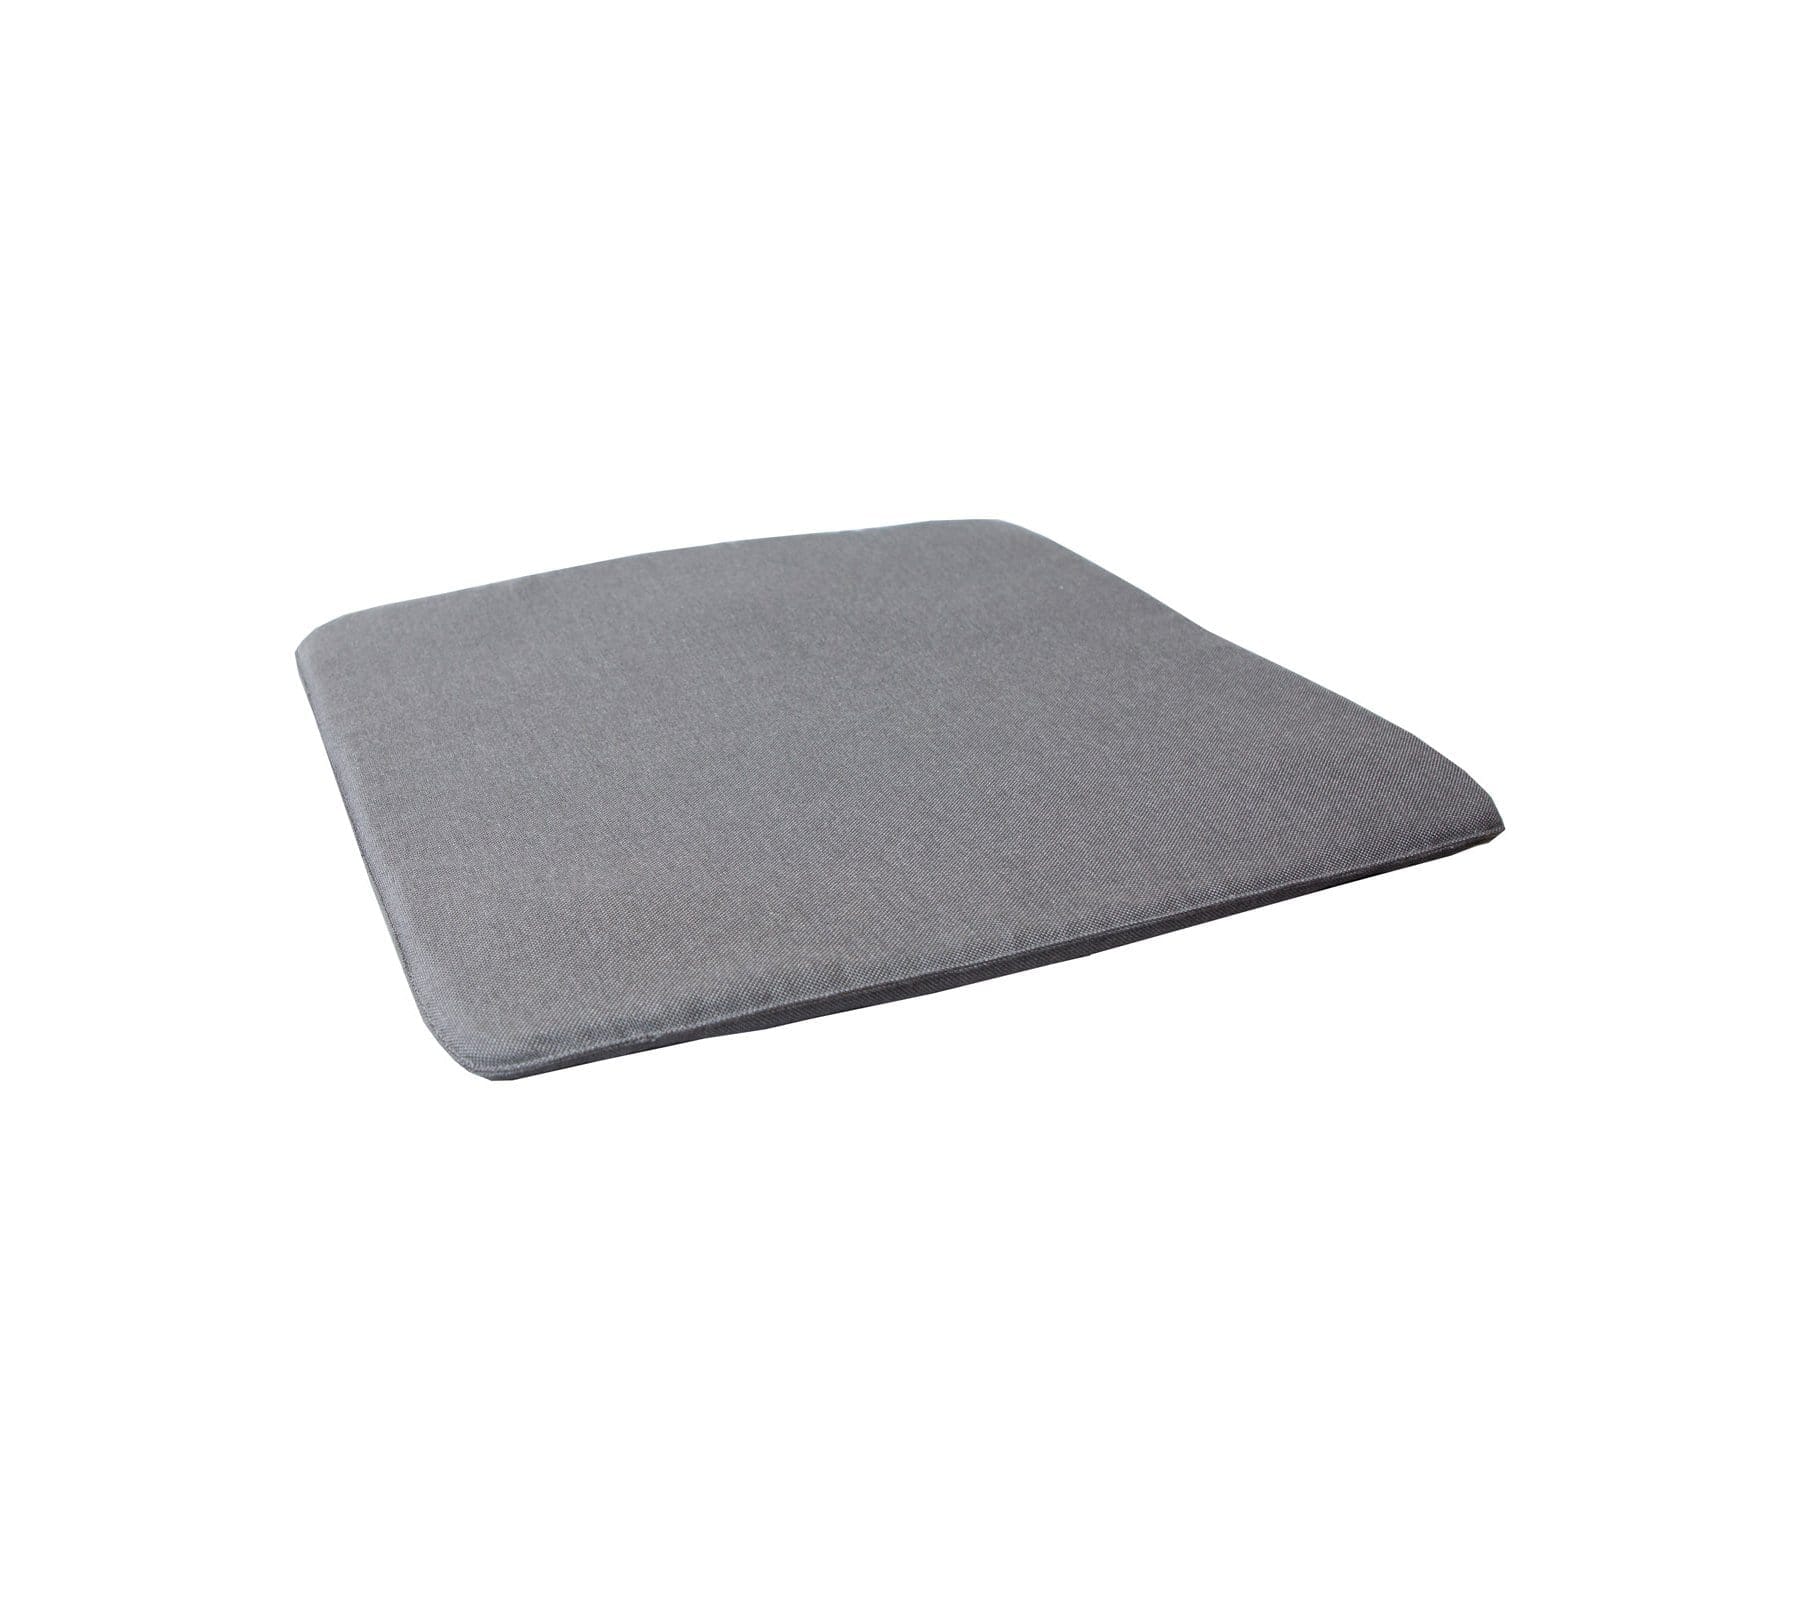 Boxhill's Amaze Chair Cushion Natte Grey front view